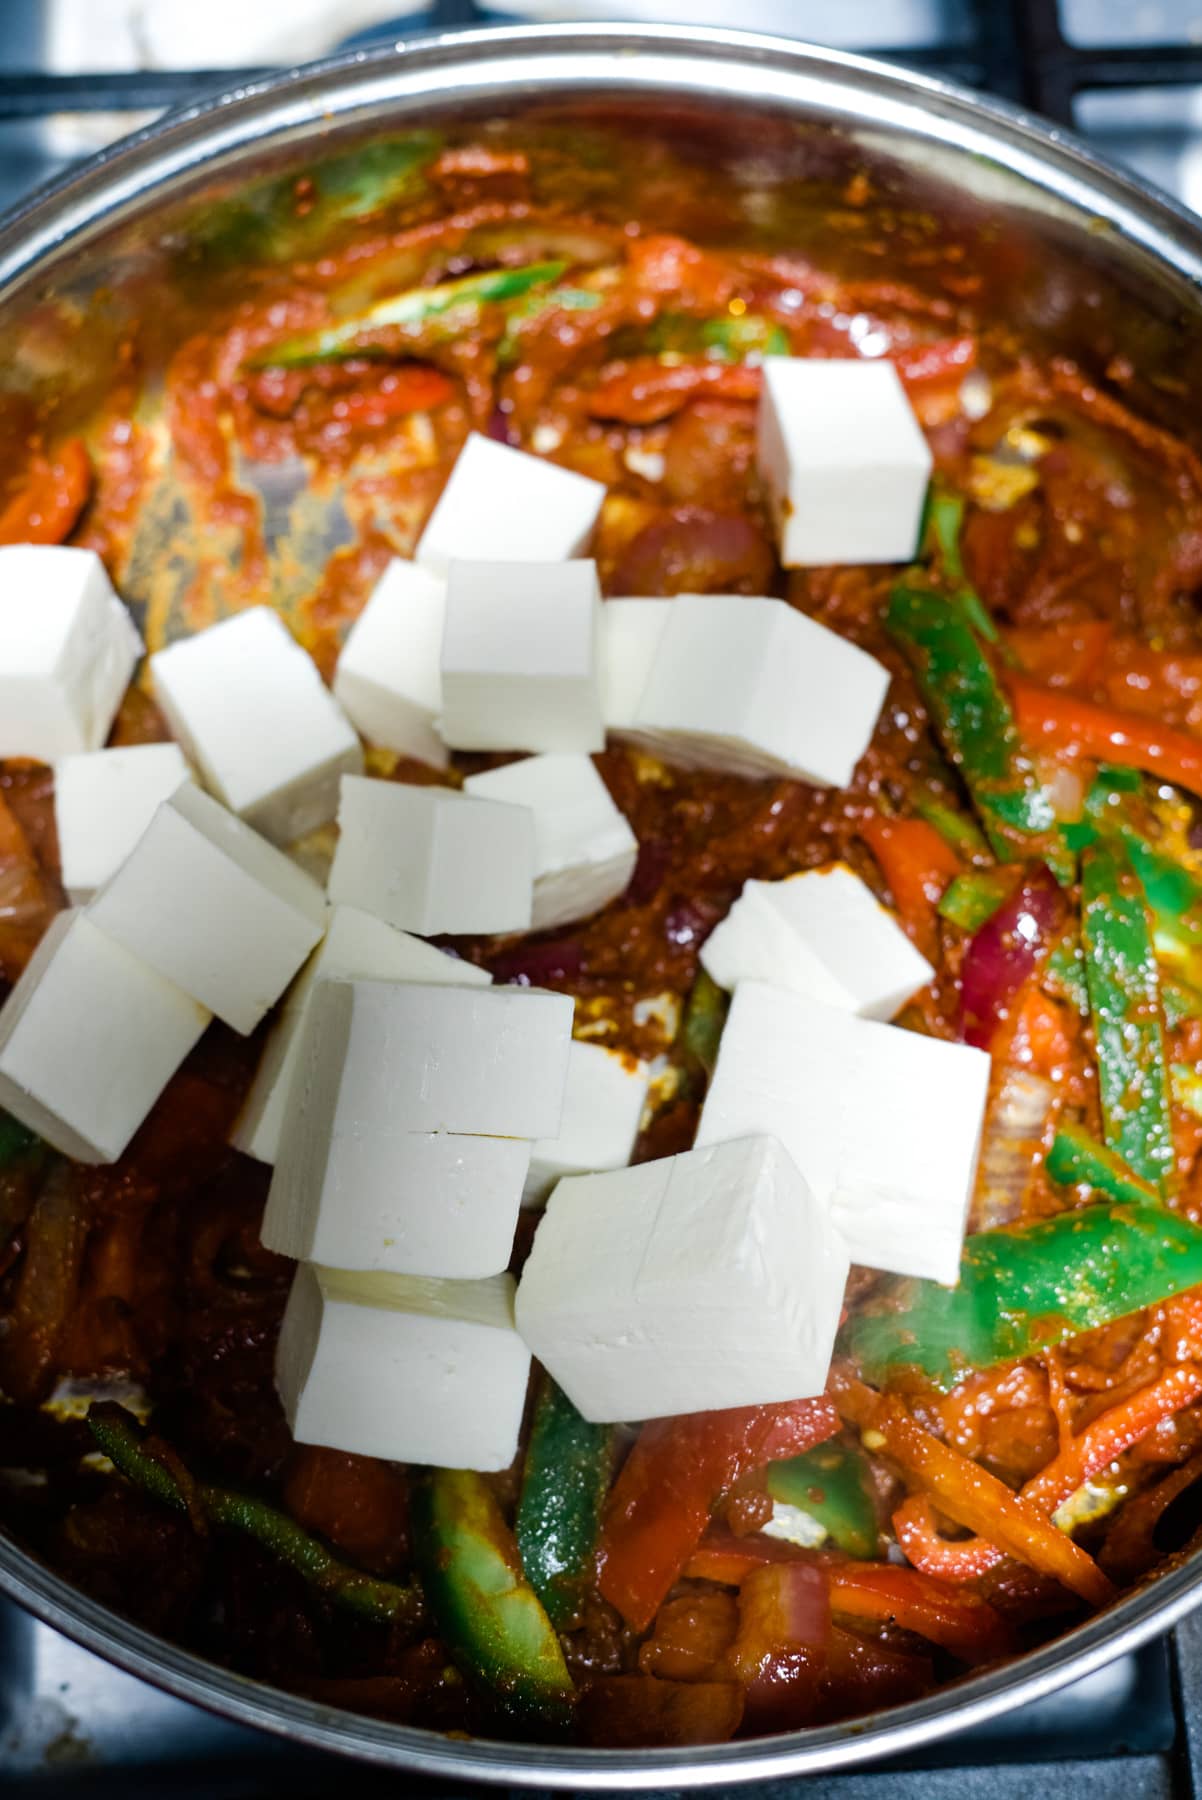 paneer and bell peppers in tomato sauce